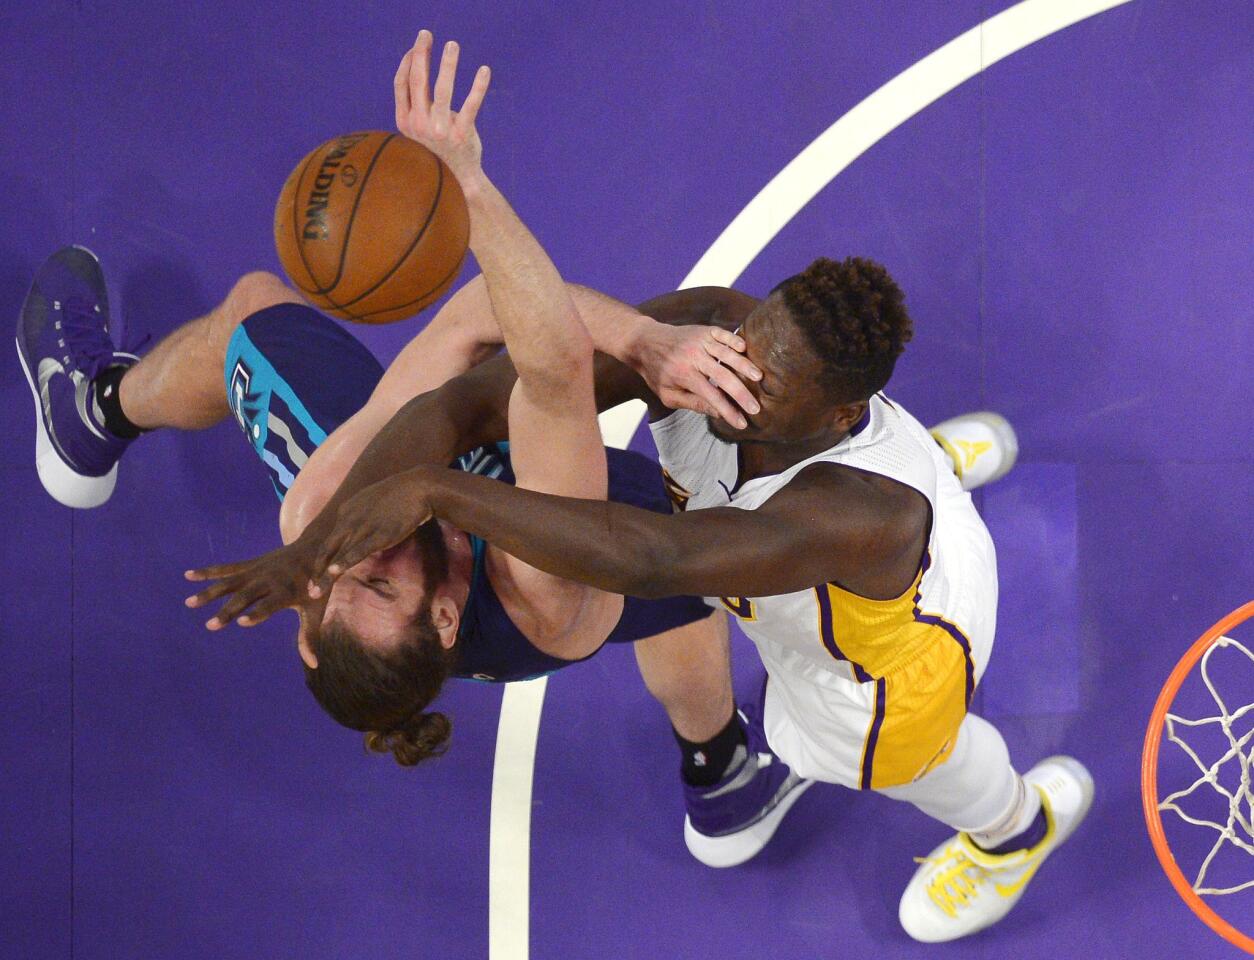 Hornets forward Spencer Hawes and Lakers forward Julius Randle battle for a rebound during a Jan 31 game at Staples Center.